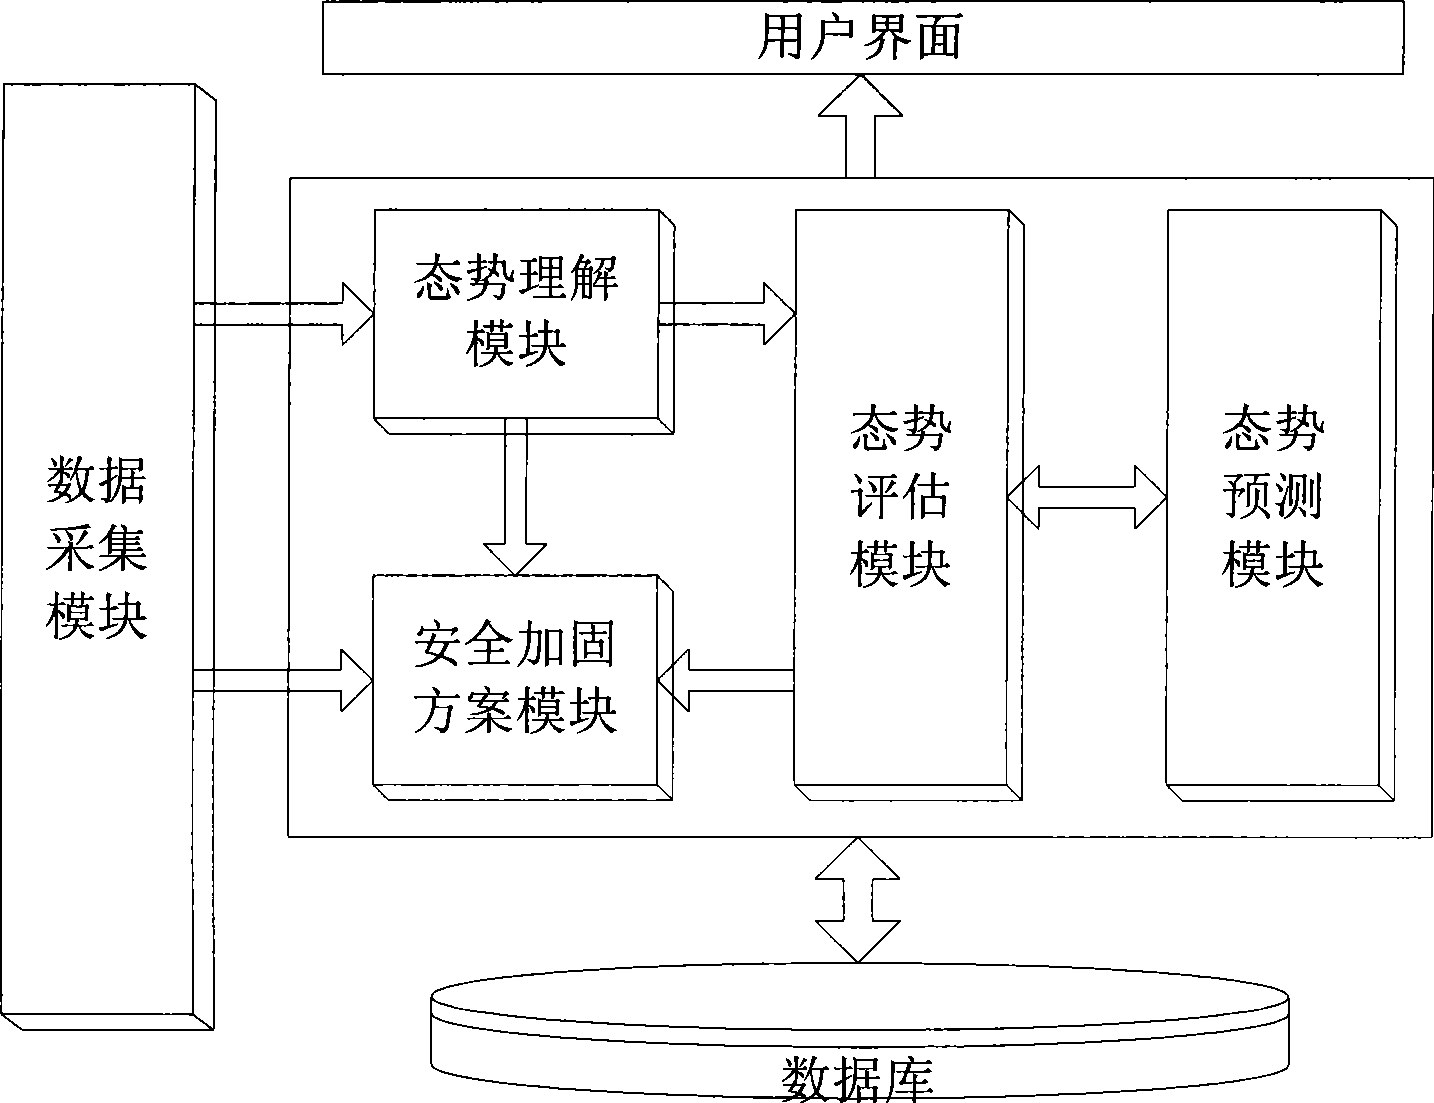 Network security situation sensing system and method based on multi-layer multi-angle analysis